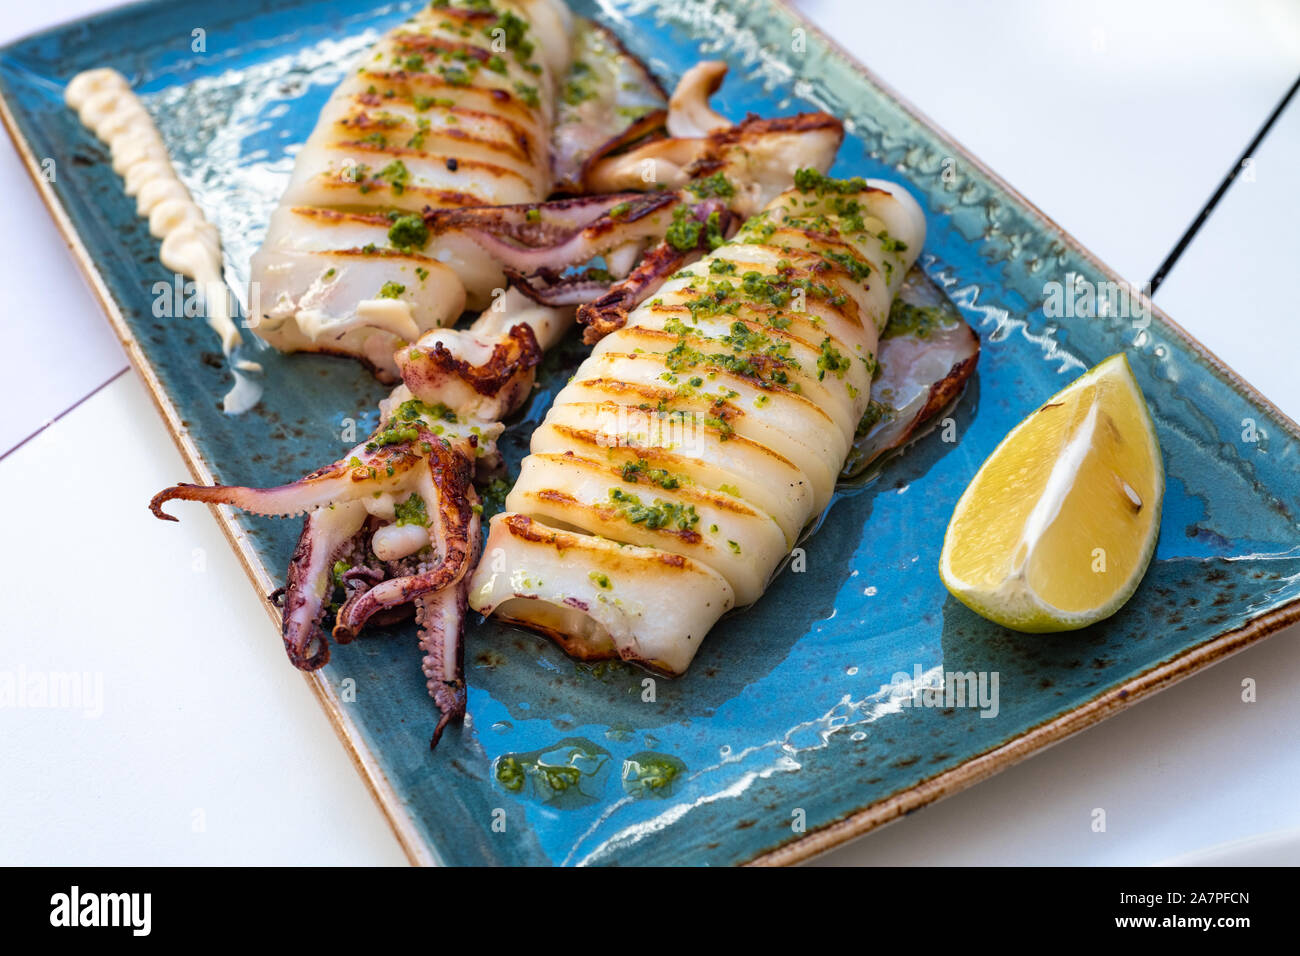 Delicious plate of grilled squid at gourmet restaurant Stock Photo